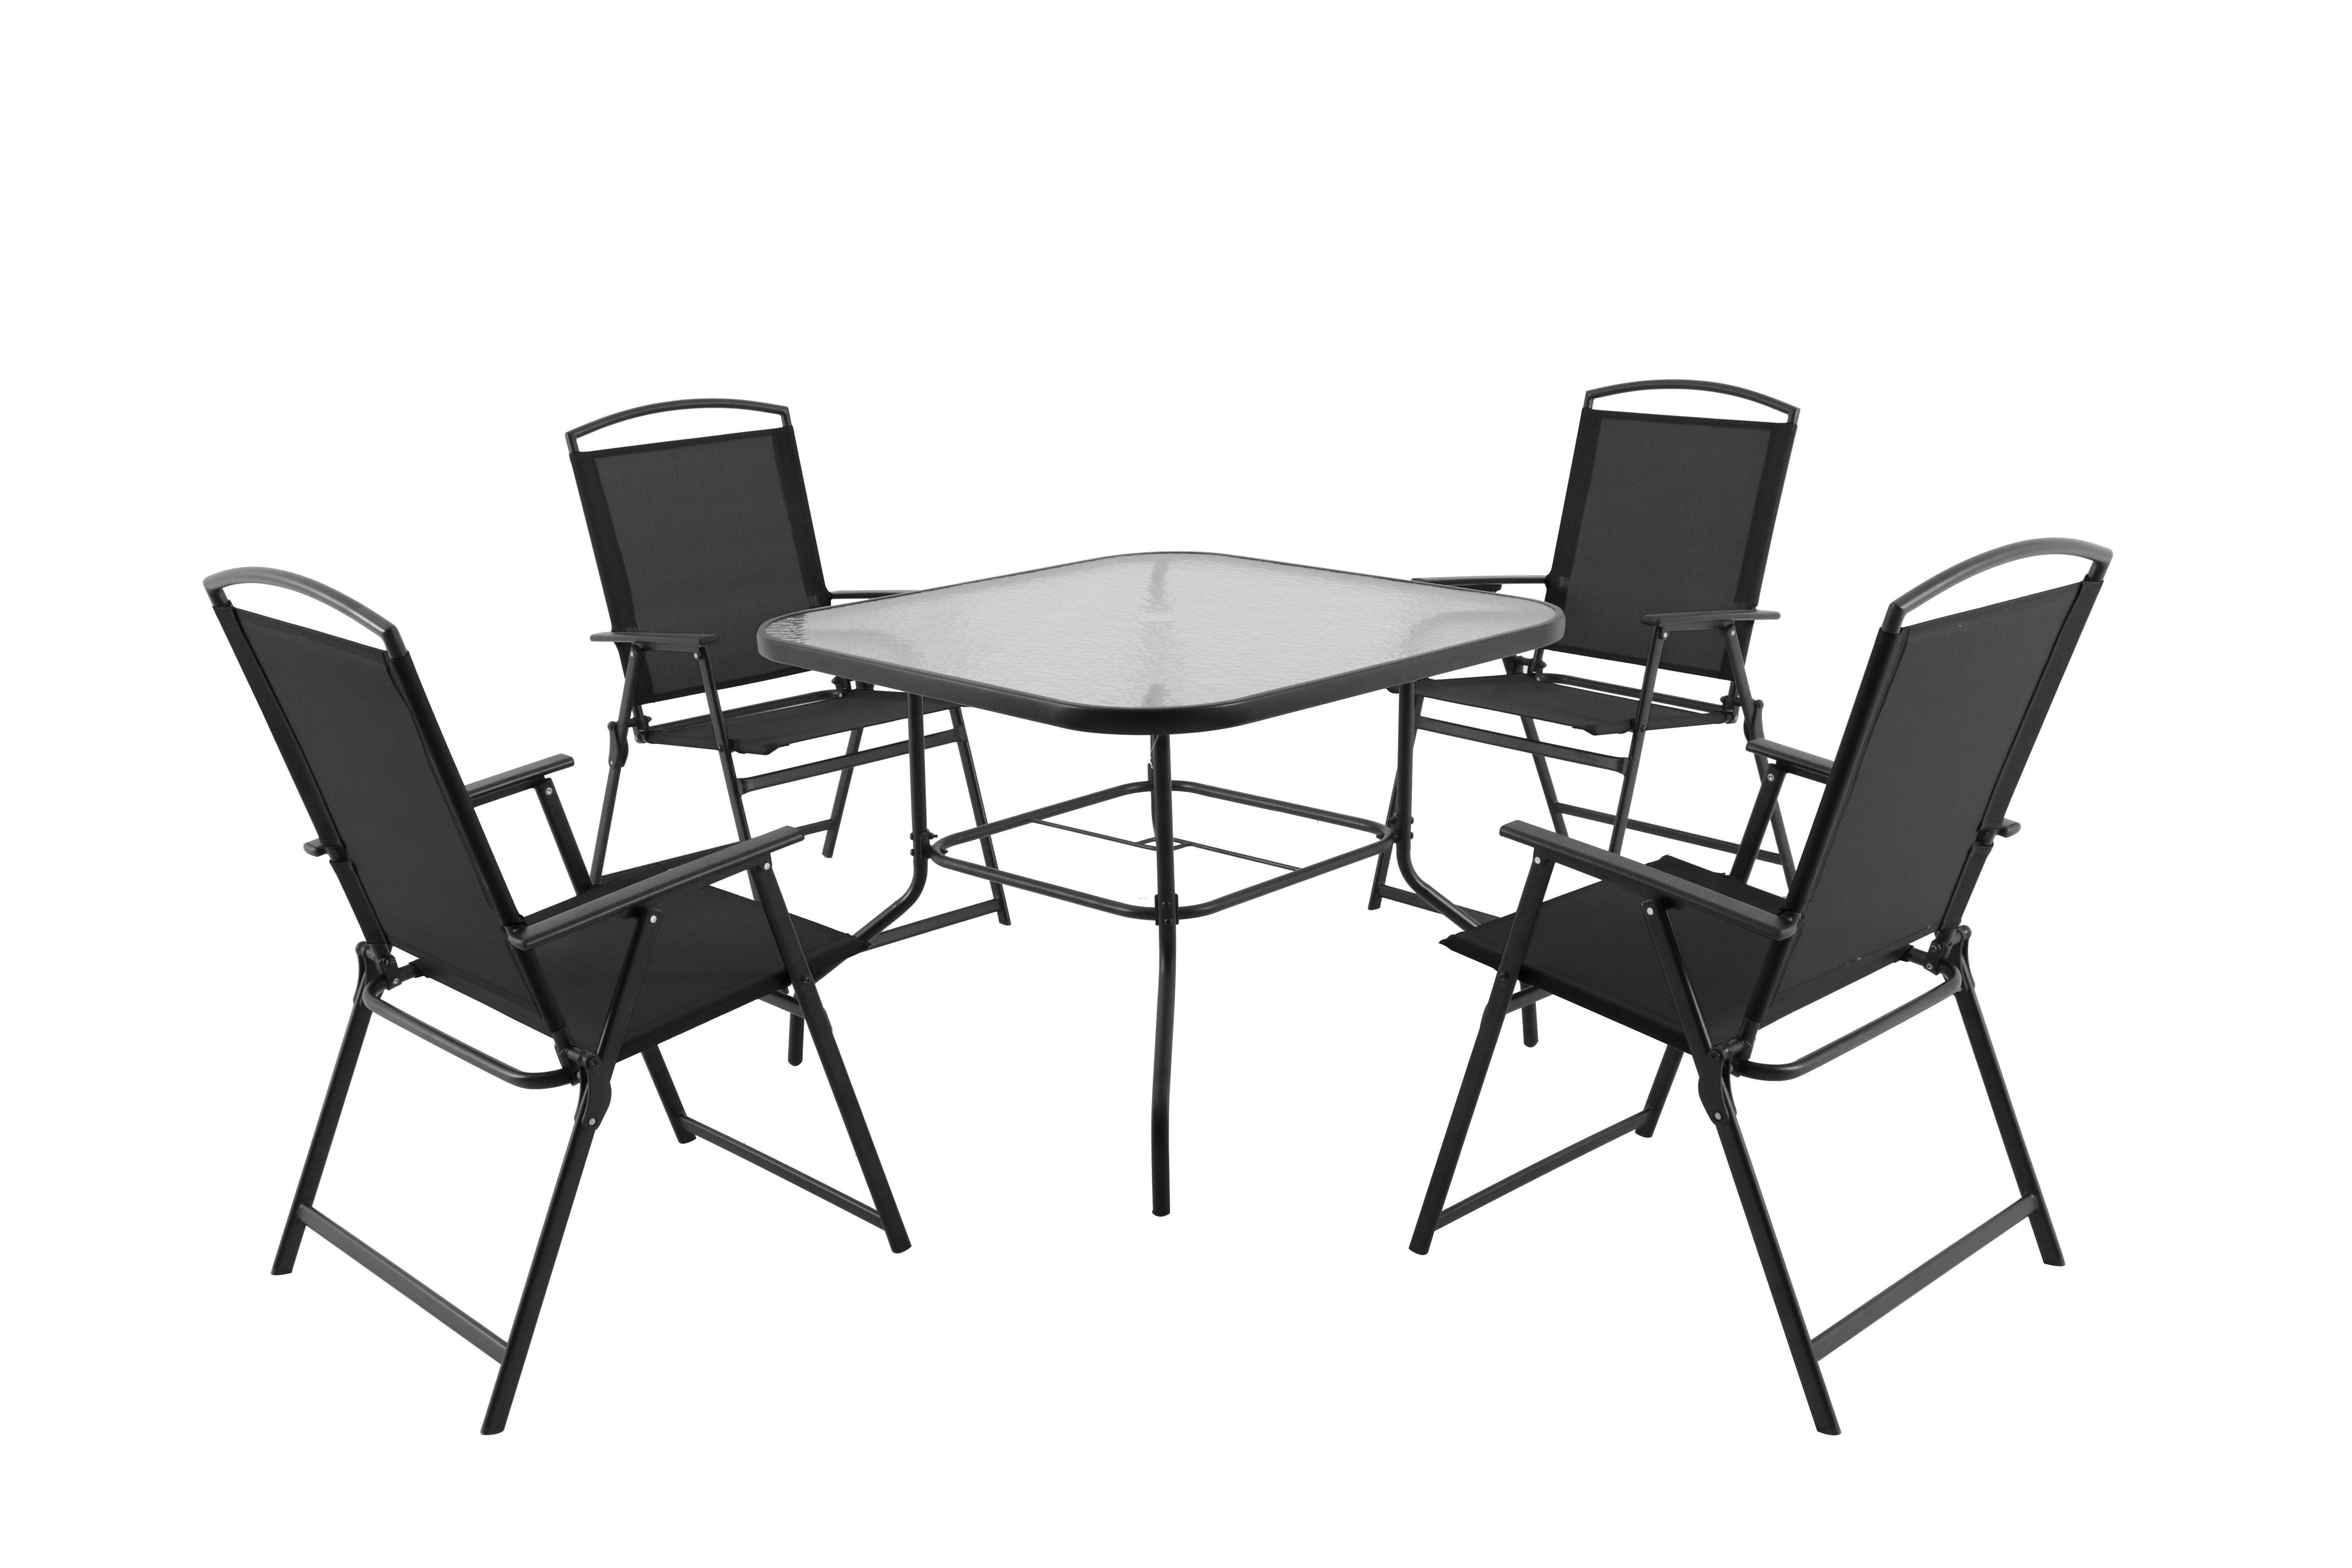 Mainstays Heritage Park Outdoor Patio 5 Piece Dining Set, 4 person seating, Black - image 5 of 10